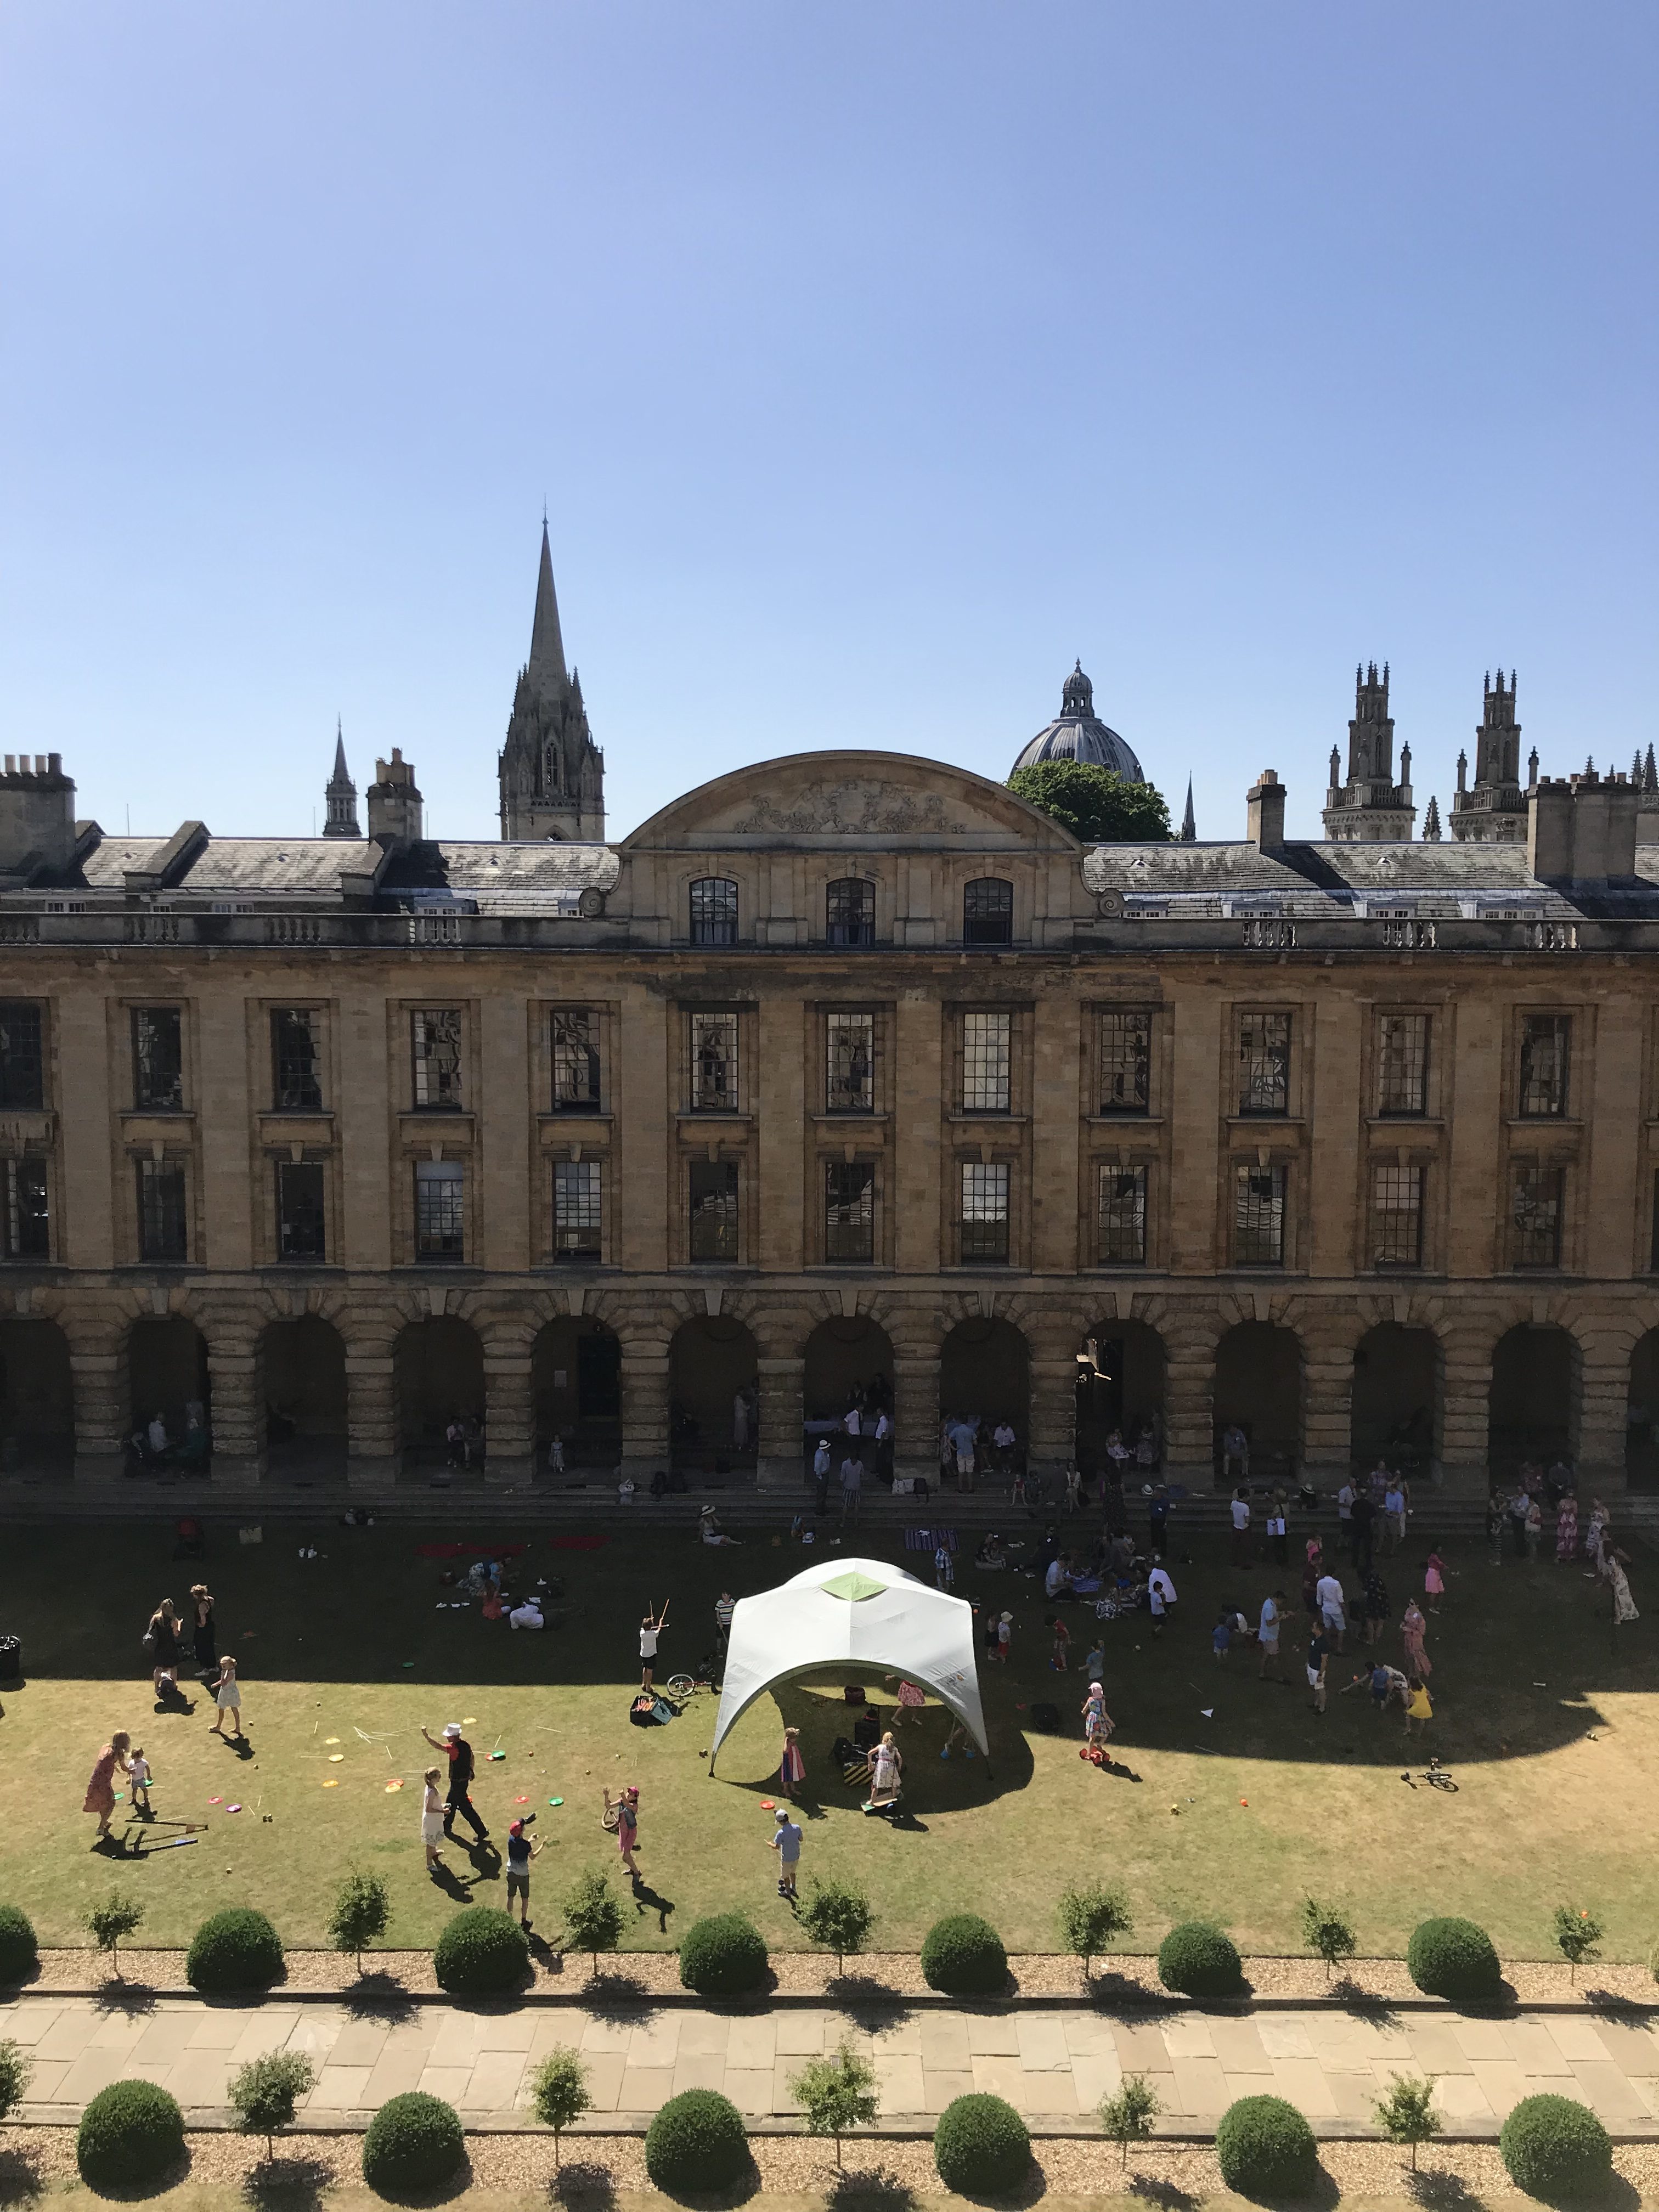 Garden Party taking place in Queen's Front Quad